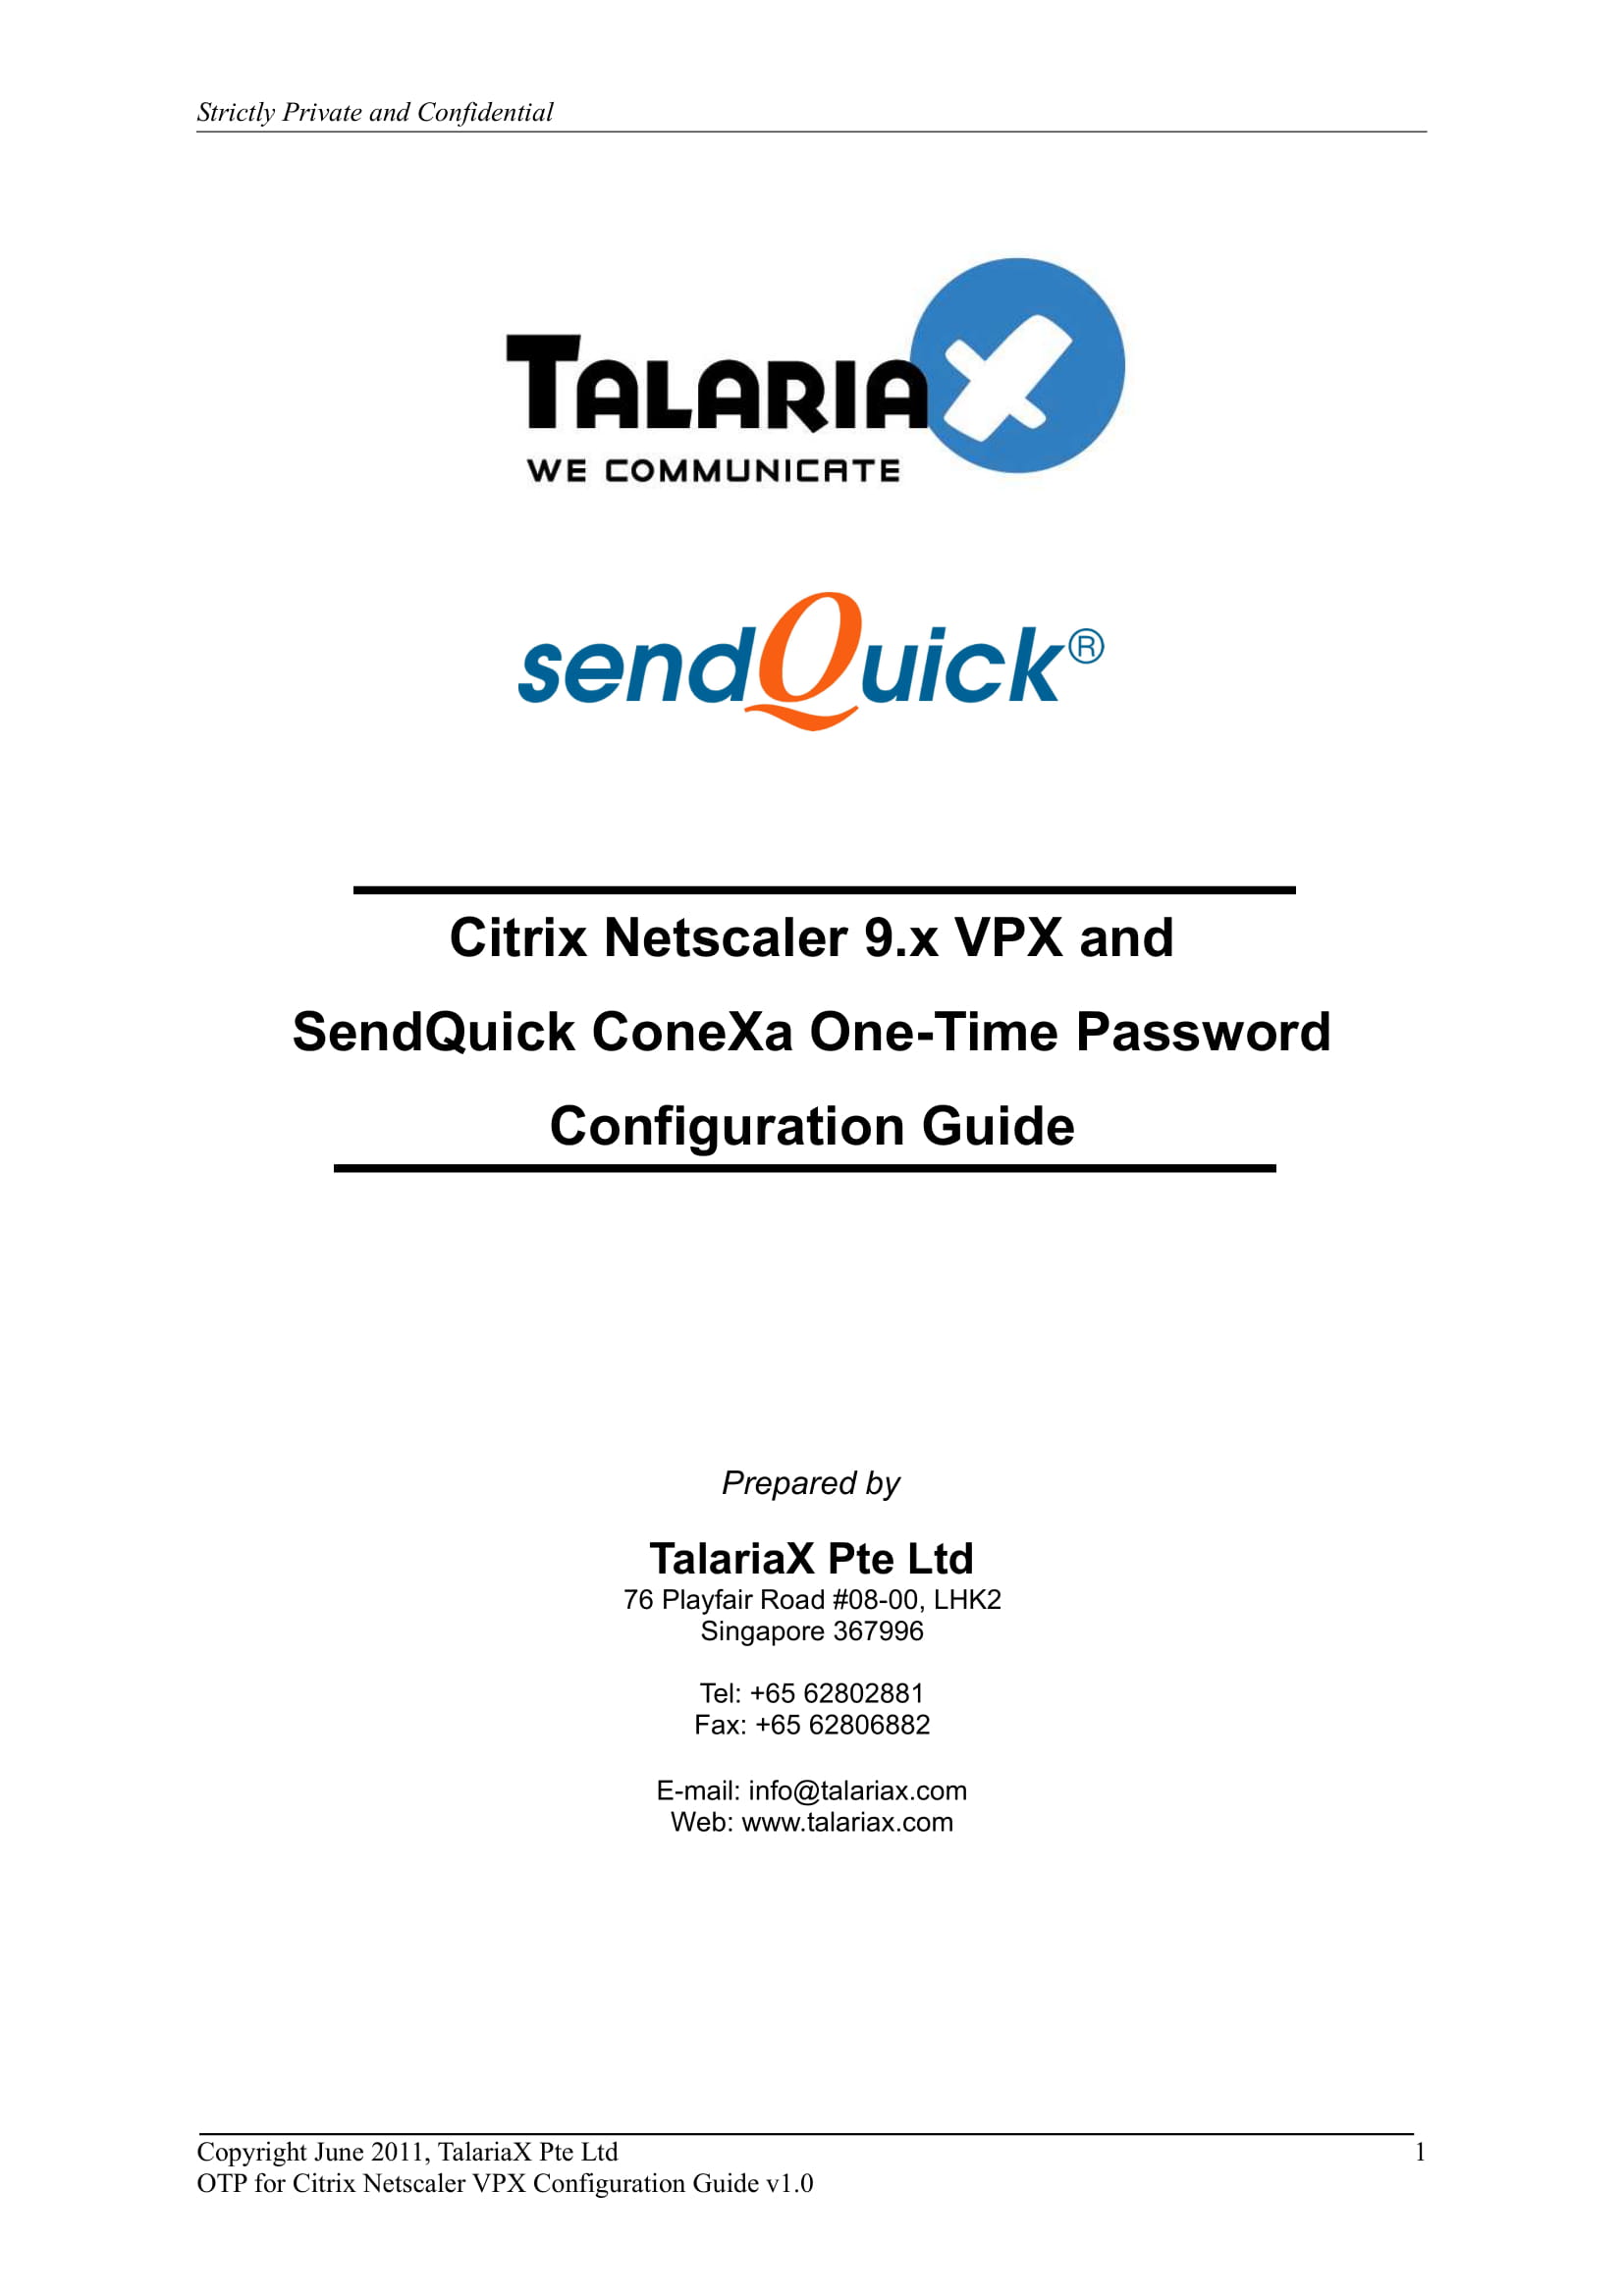 You are currently viewing Citrix Netscaler 9.x VPX and SendQuick ConeXa One-Time Password Configuration Guide